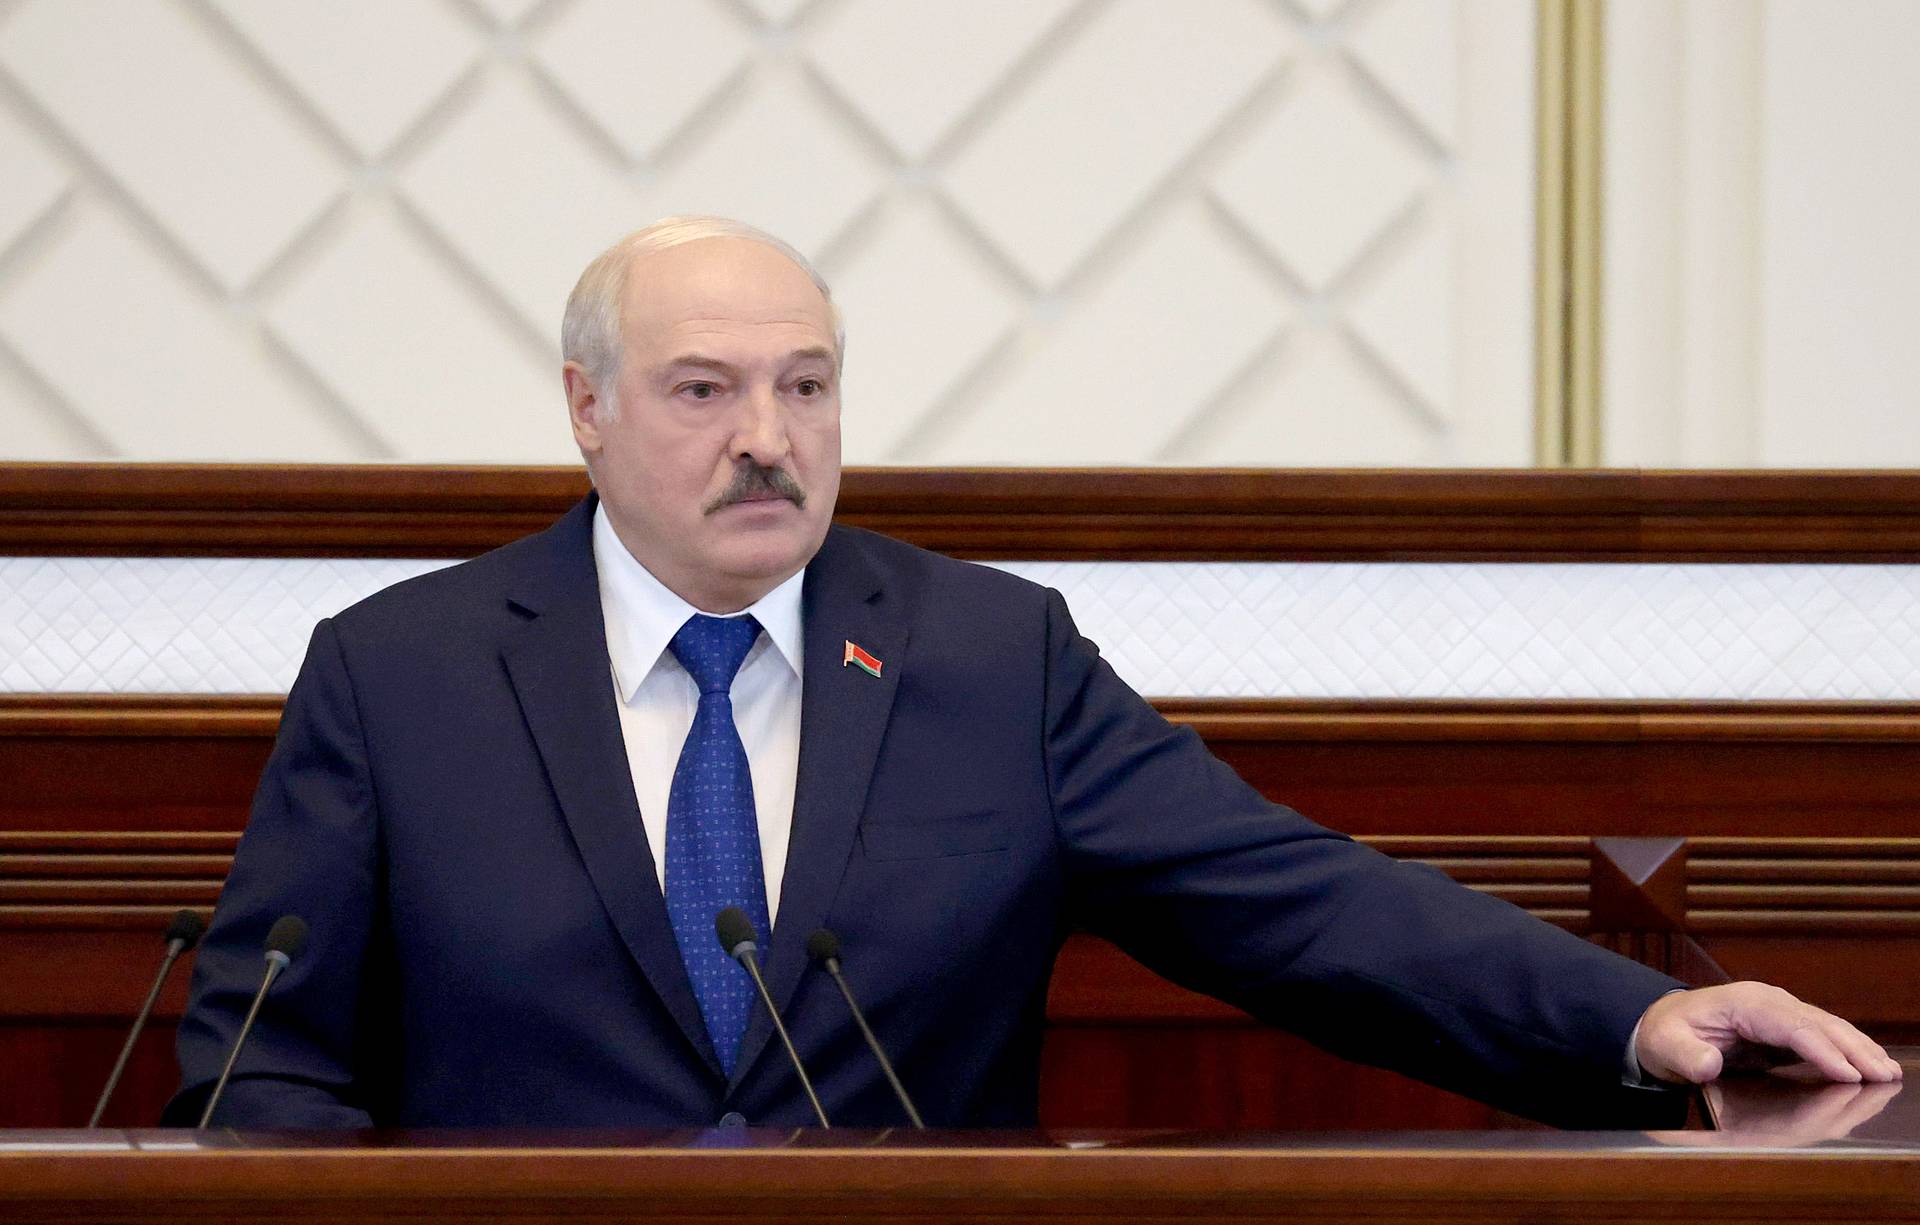 'This Is War': Lukashenko's First Public Comments On RyanAir Incident